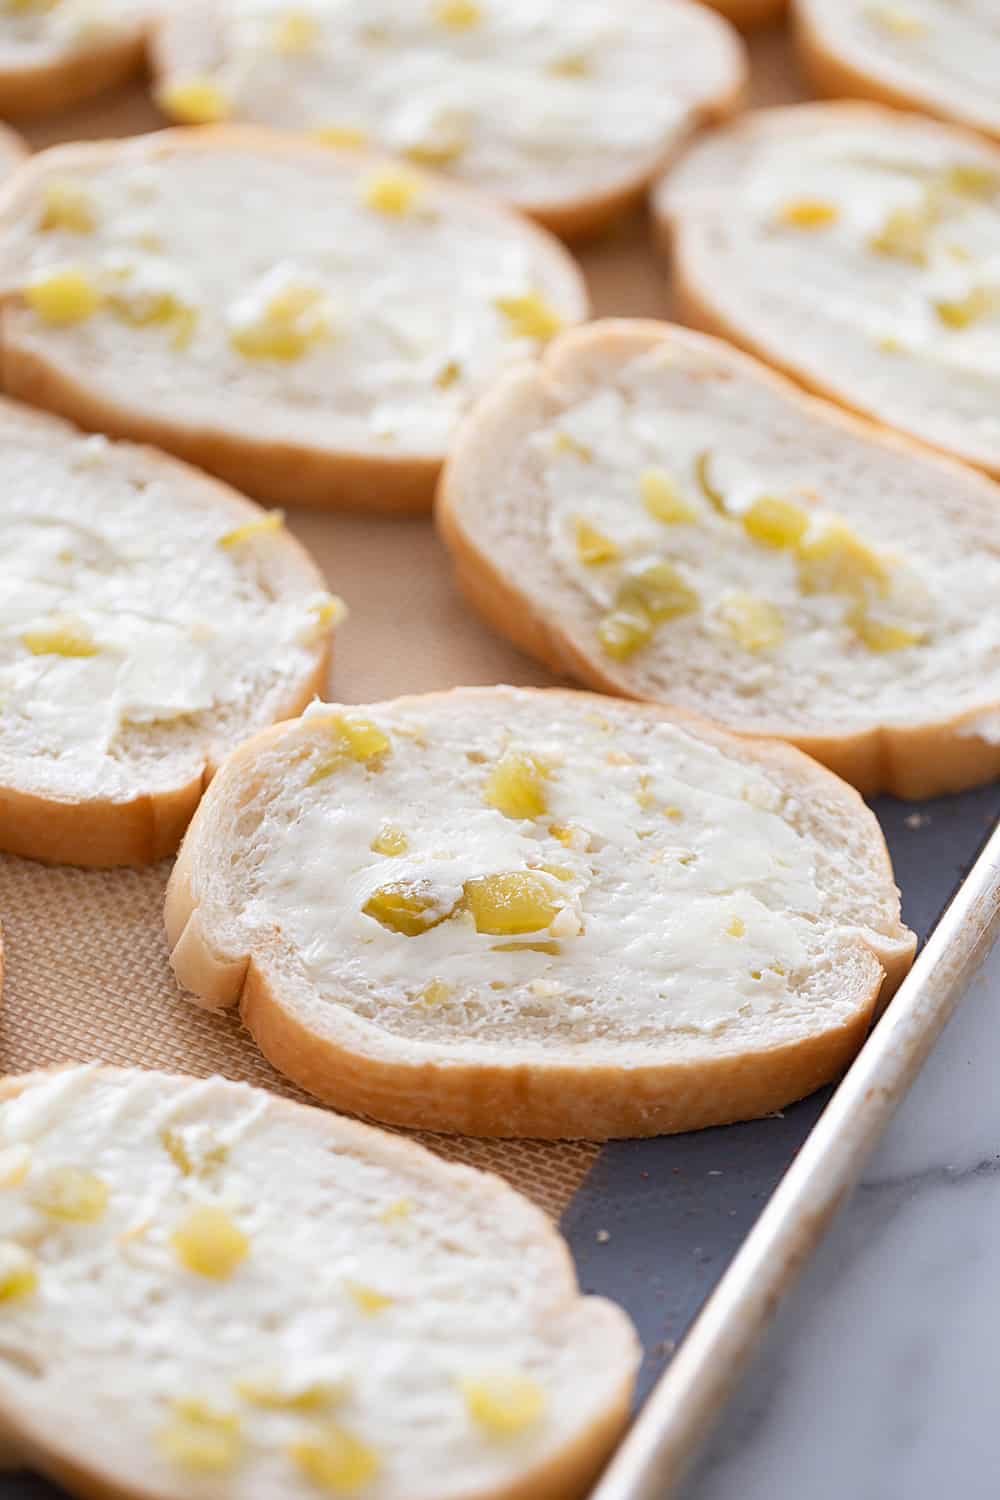 Creamy, cheesy spread with a bit of kick? Check! This zesty cheese spread is a must-have appetizer whether you're having a party of 1 or 100. | #halfscratched #appetizer #cheese #easyrecipe #hotappetizer #baking #cheesespread #easyappetizer